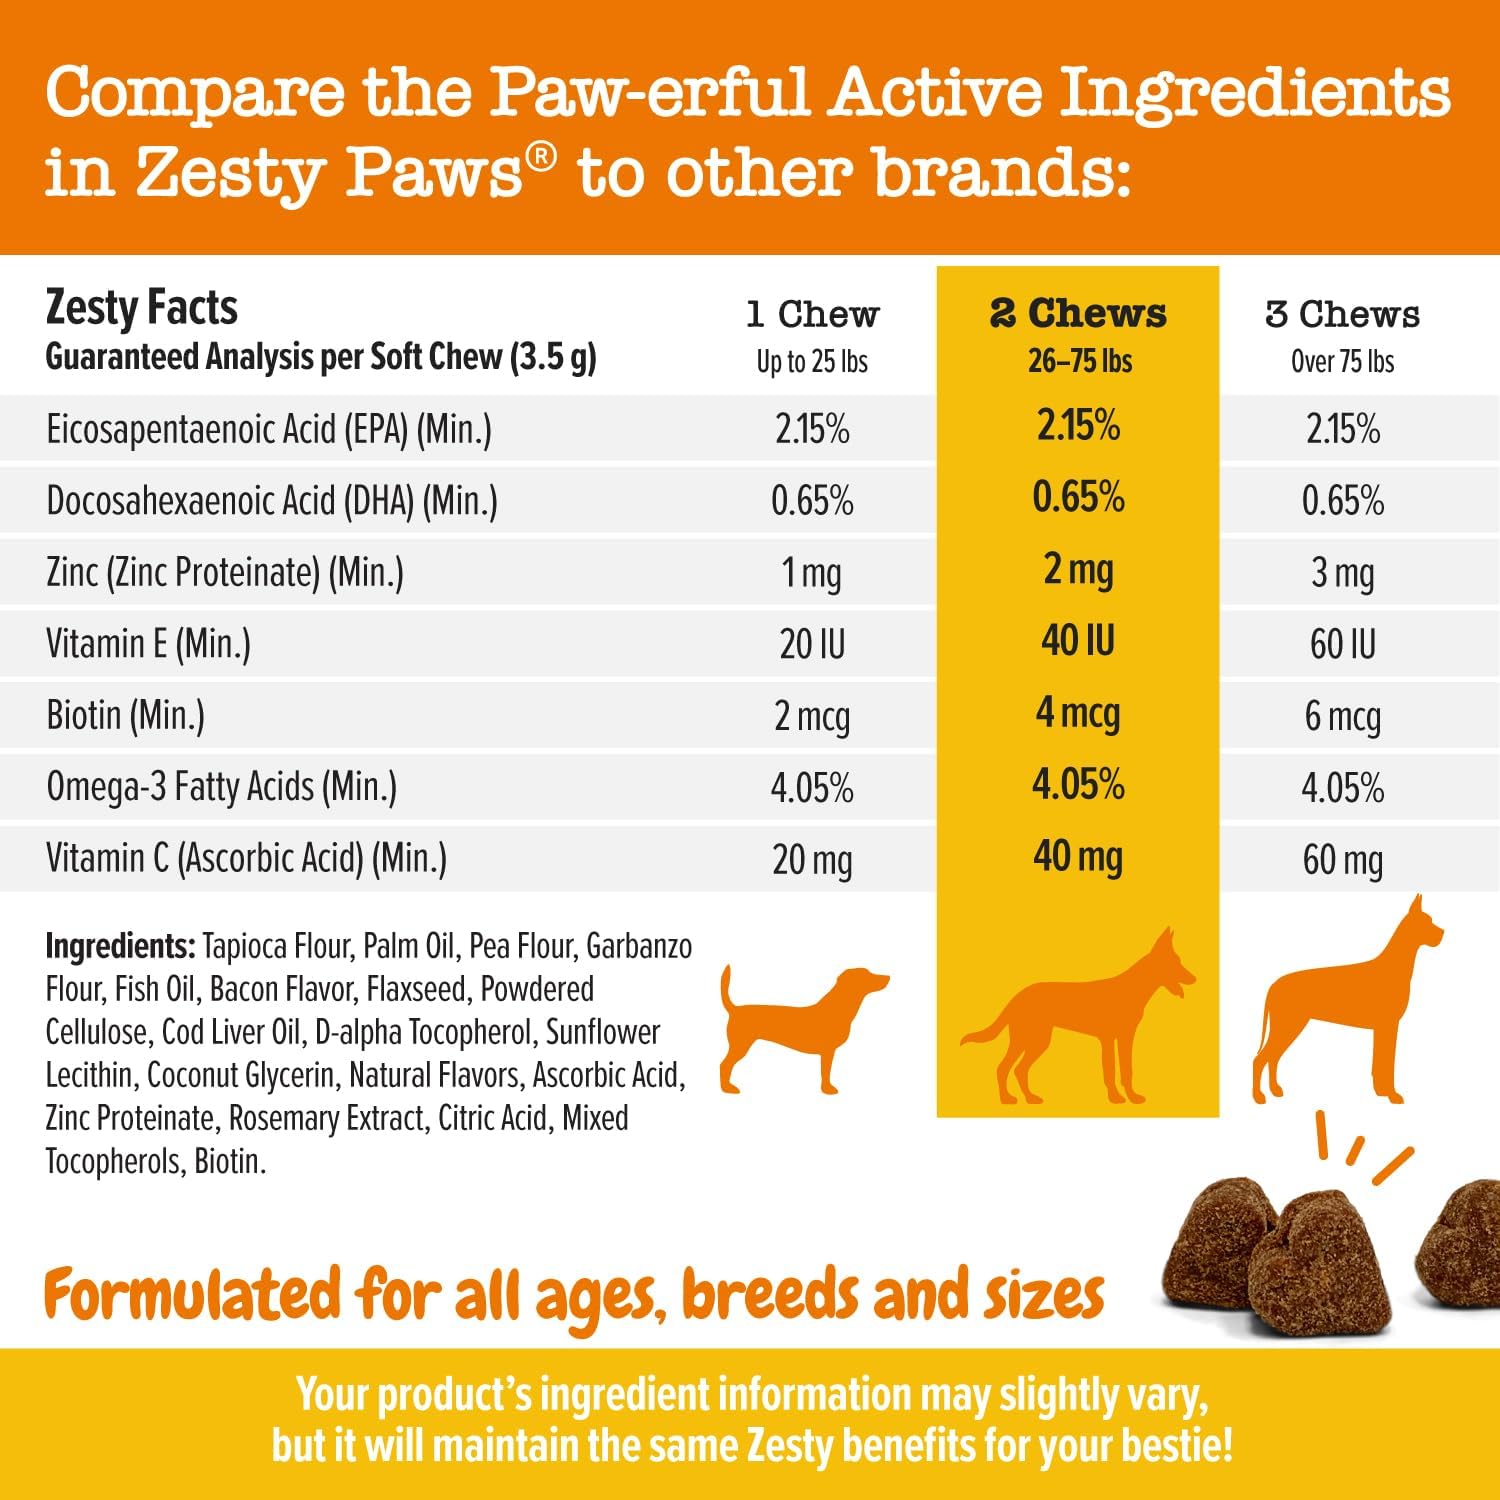 Zesty Paws Skin & Coat Bites for Dogs – Fish Oil Soft Chews with Omega-3 Fatty Acids EPA & DHA - Skin, Coat, Antioxidant & Immune Support - Bacon - 90 Count